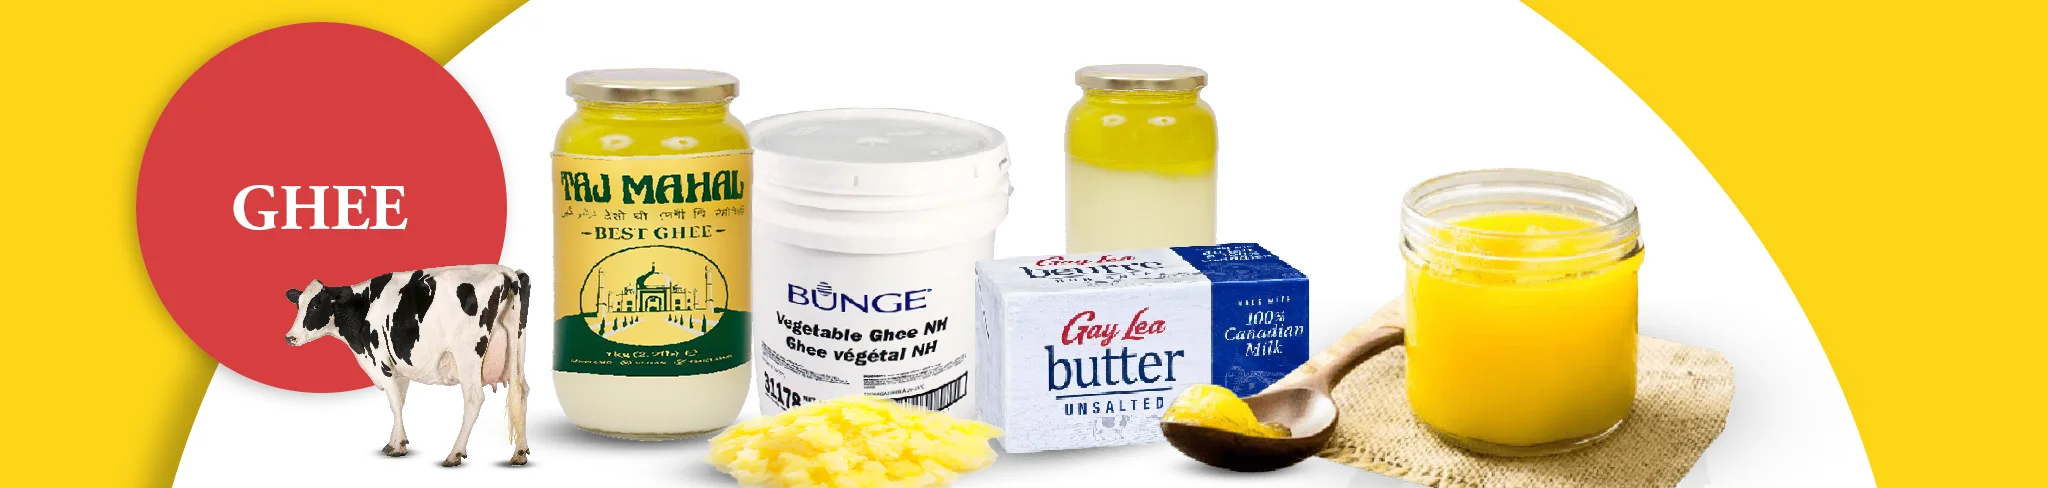 Dairy Max Products - Ghee